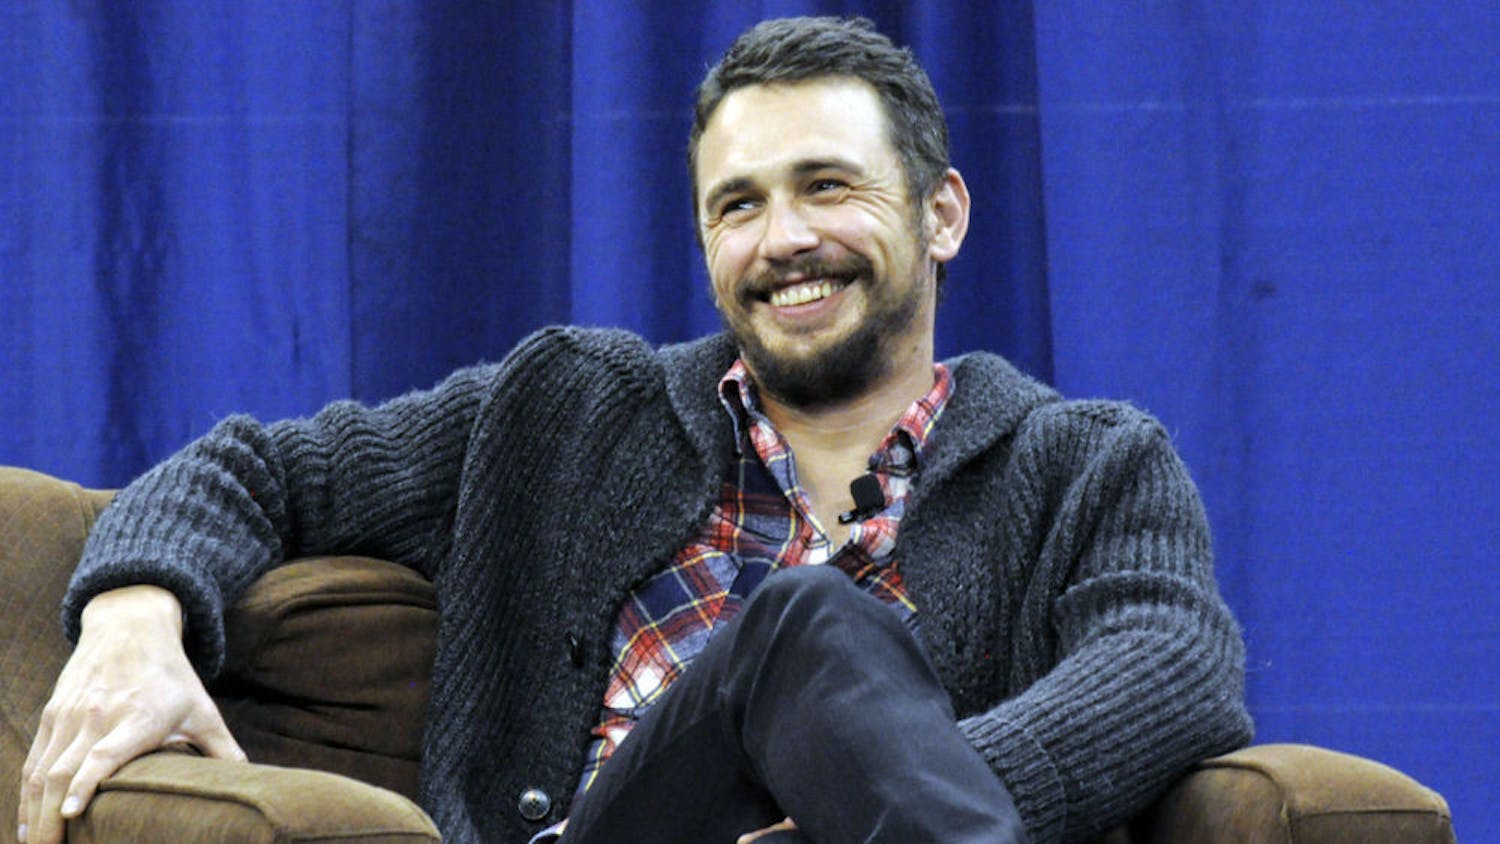 James Franco speaks to a crowd at the O'Connell Center on Wednesday. In his talk, which was sponsored by Accent, Franco discussed his reaction to the 2014 Sony hack, how he transformed into the character Alien for the movie "Spring Breakers," and his growth as an actor.